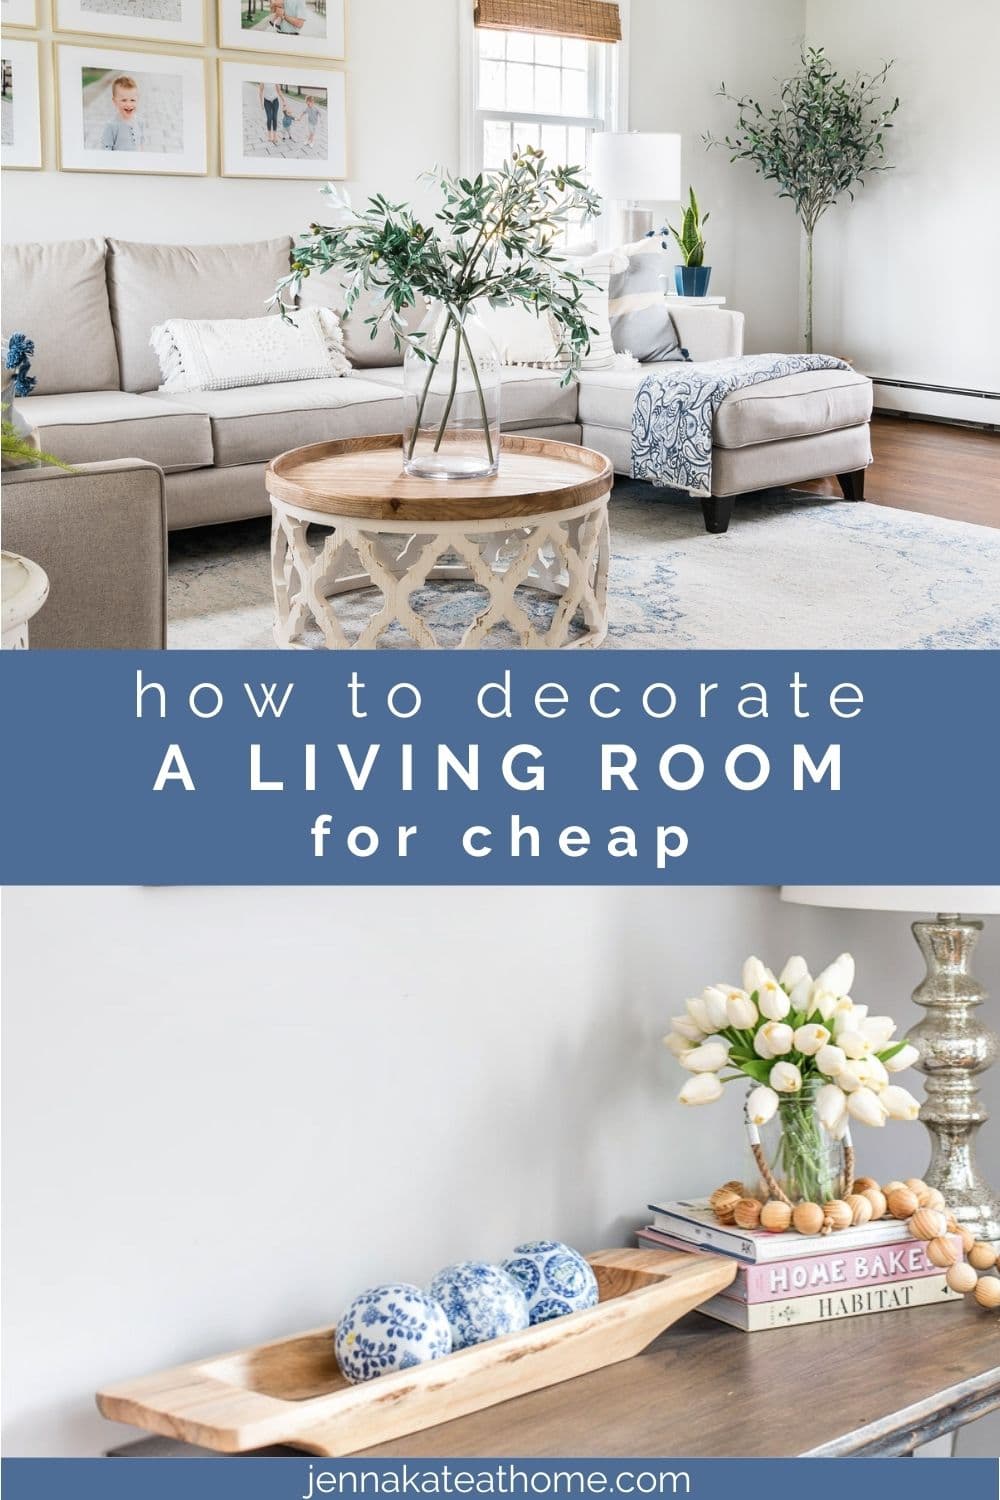 how to decorate a living room for cheap